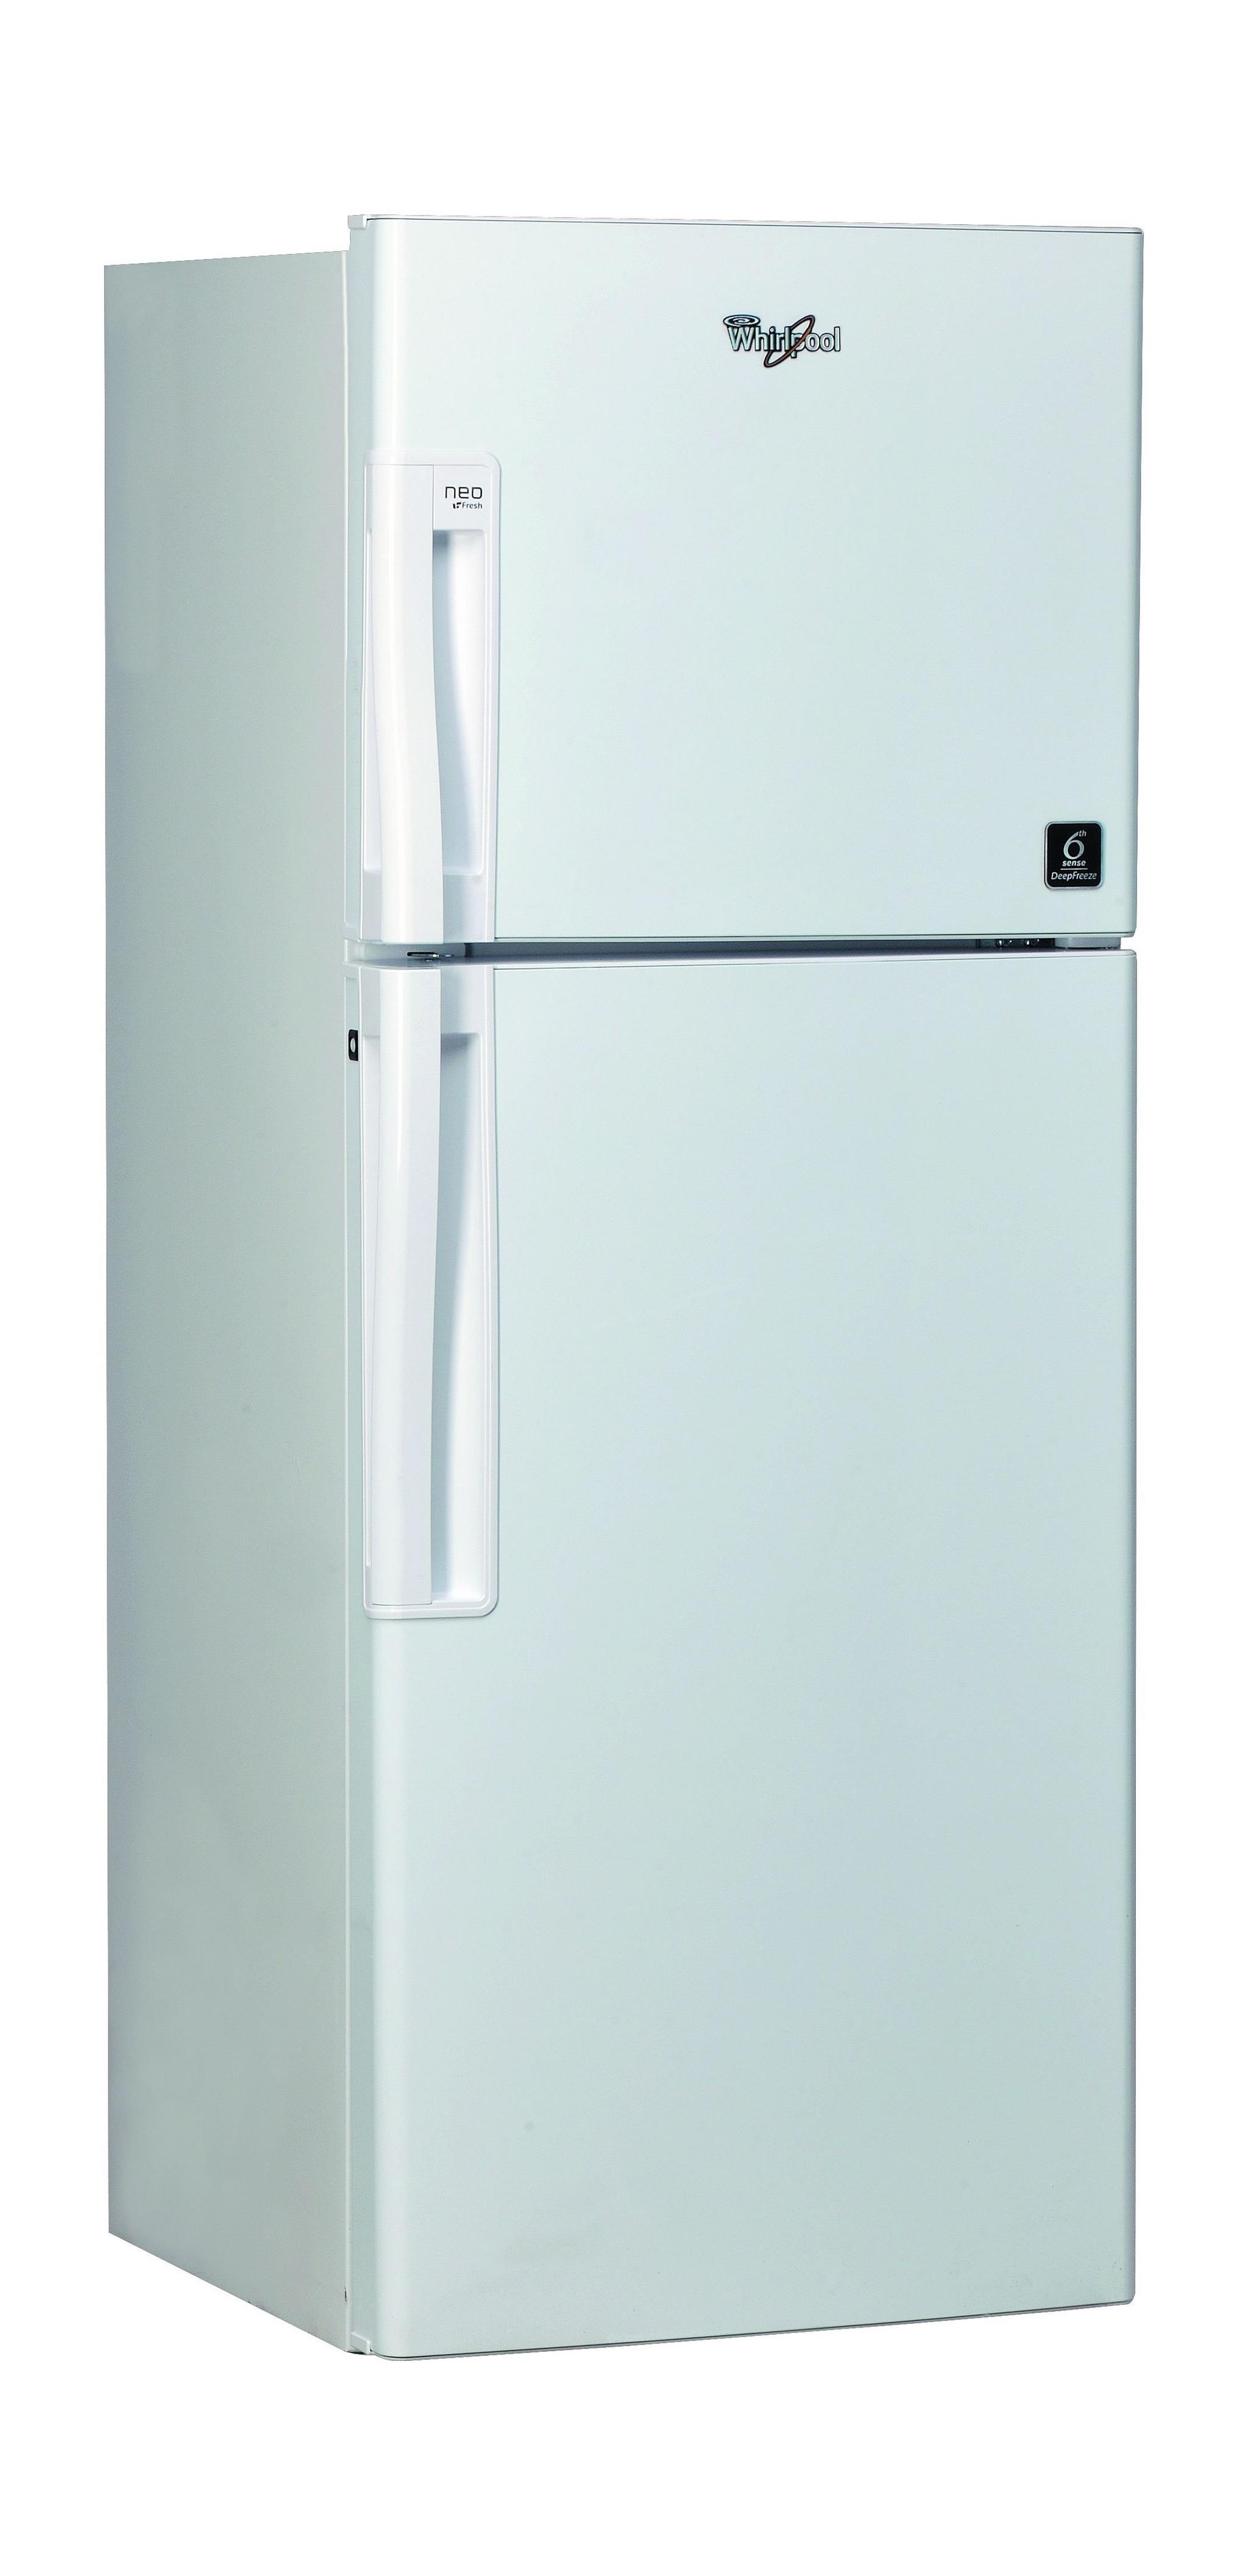 Whirlpool 11 Cft. Top Mount Refrigerator (WTM362RWH) - White